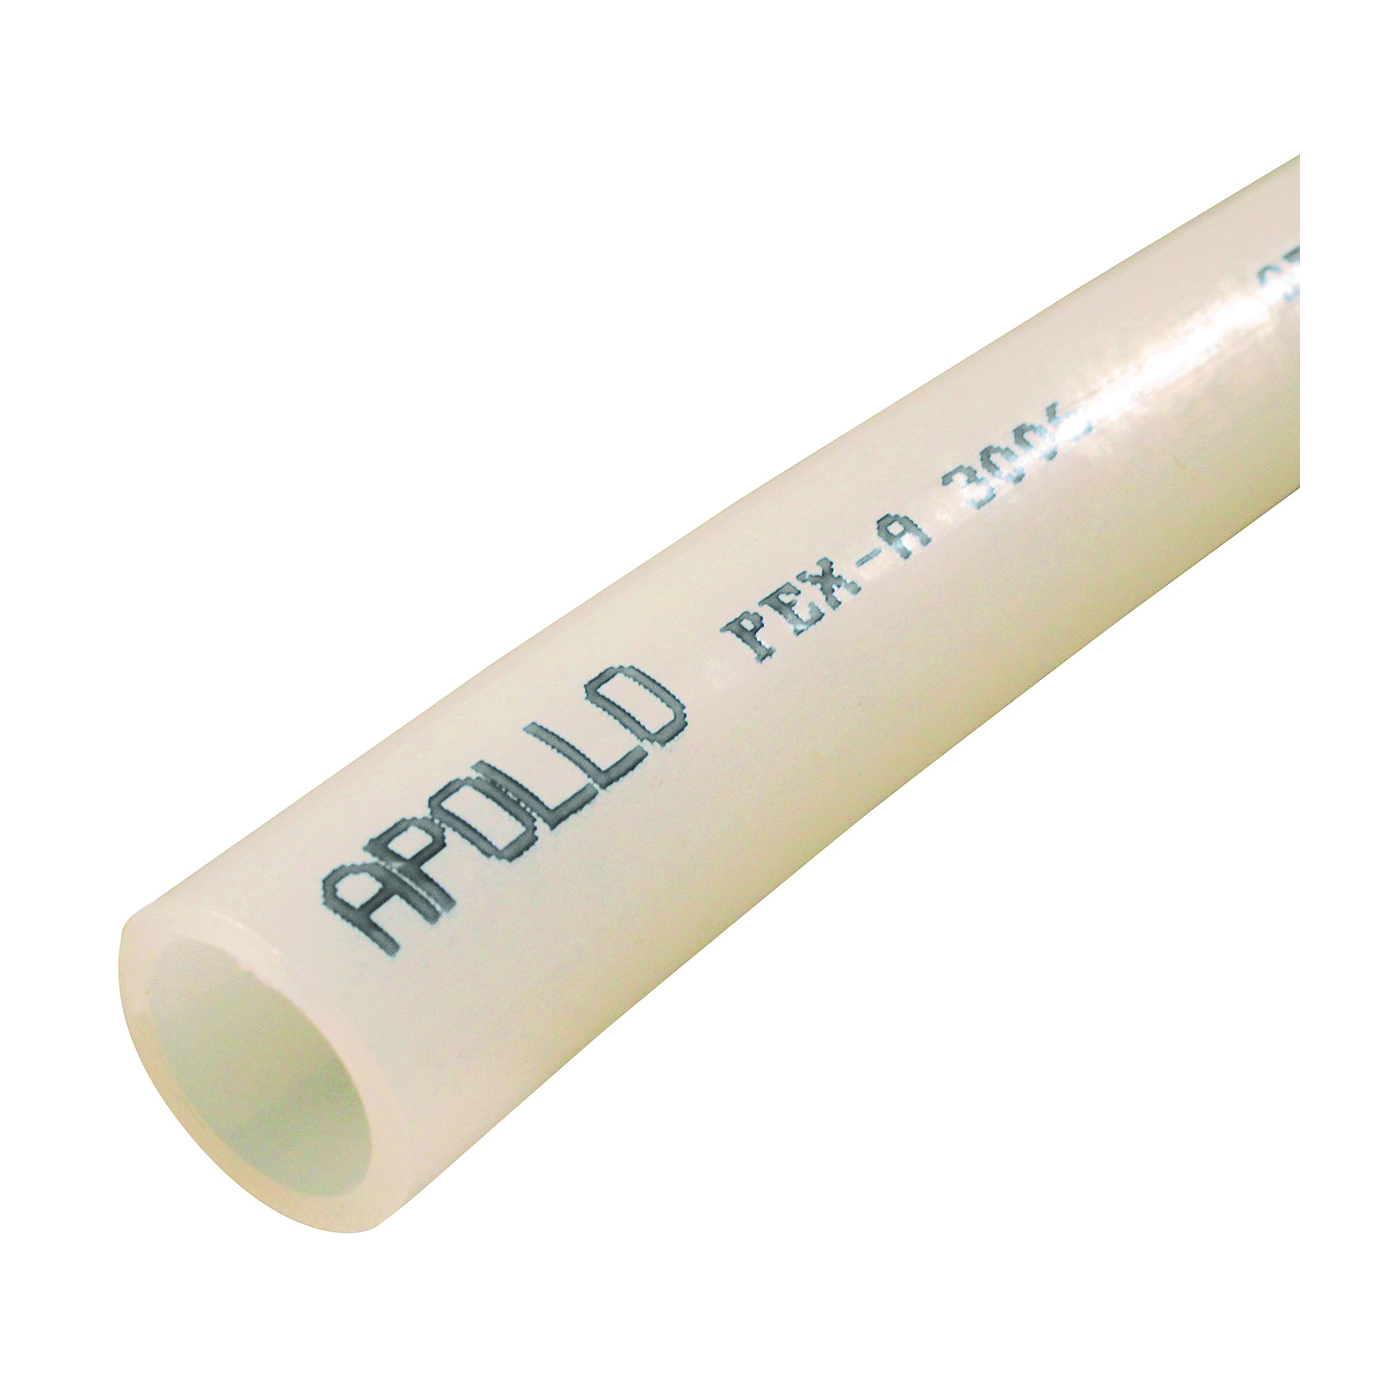 EPPW30012 PEX-A Pipe Tubing, 1/2 in, Opaque, 300 ft L